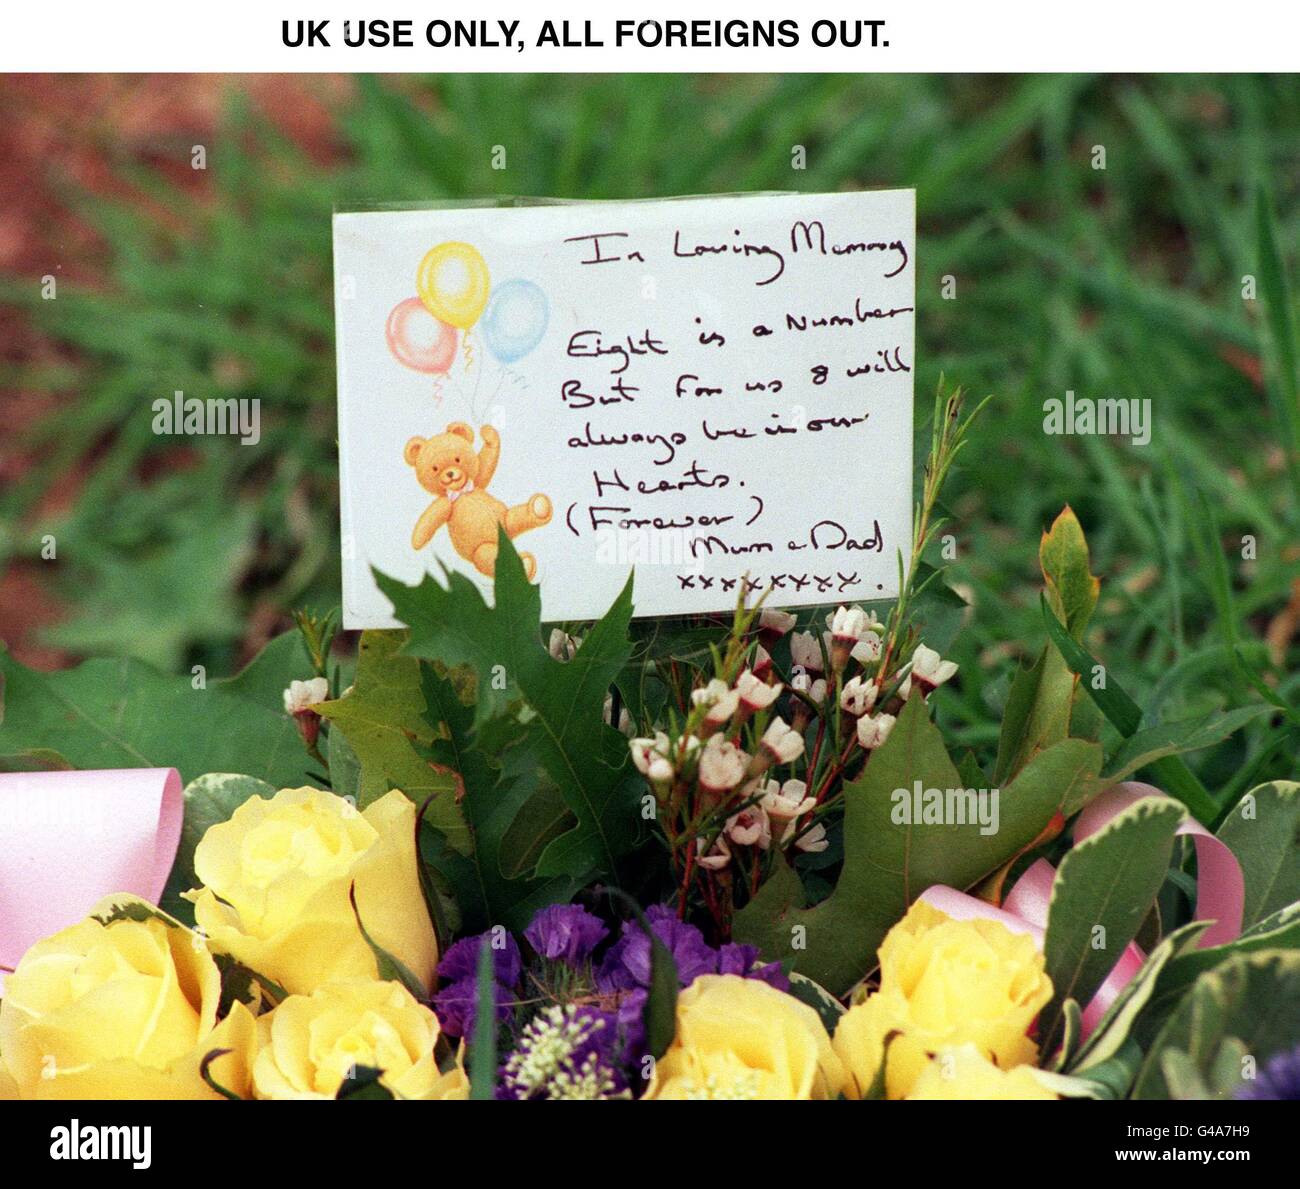 UK USE ONLY, ALL FOREIGNS OUT. Mandy Allwood, who became pregnant with eight babies but lost them all, visited their grave with her partner Paul Hudson, today (Tuesday) on the first anniversary of the funeral, and wept as they laid a wreath on the grave at West Norwood cemetery, south London. A note on the wreath read: In loving memory. Eight is a number but for us eight will always live in our hearts. Forever, Mum and Dad. See PA Story SOCIAL Allwood. Photo by Fiona Hanson. THIS PICTURE WAS TAKEN WITH THE SUBJECTS' KNOWLEDGE AND CONSENT. Stock Photo